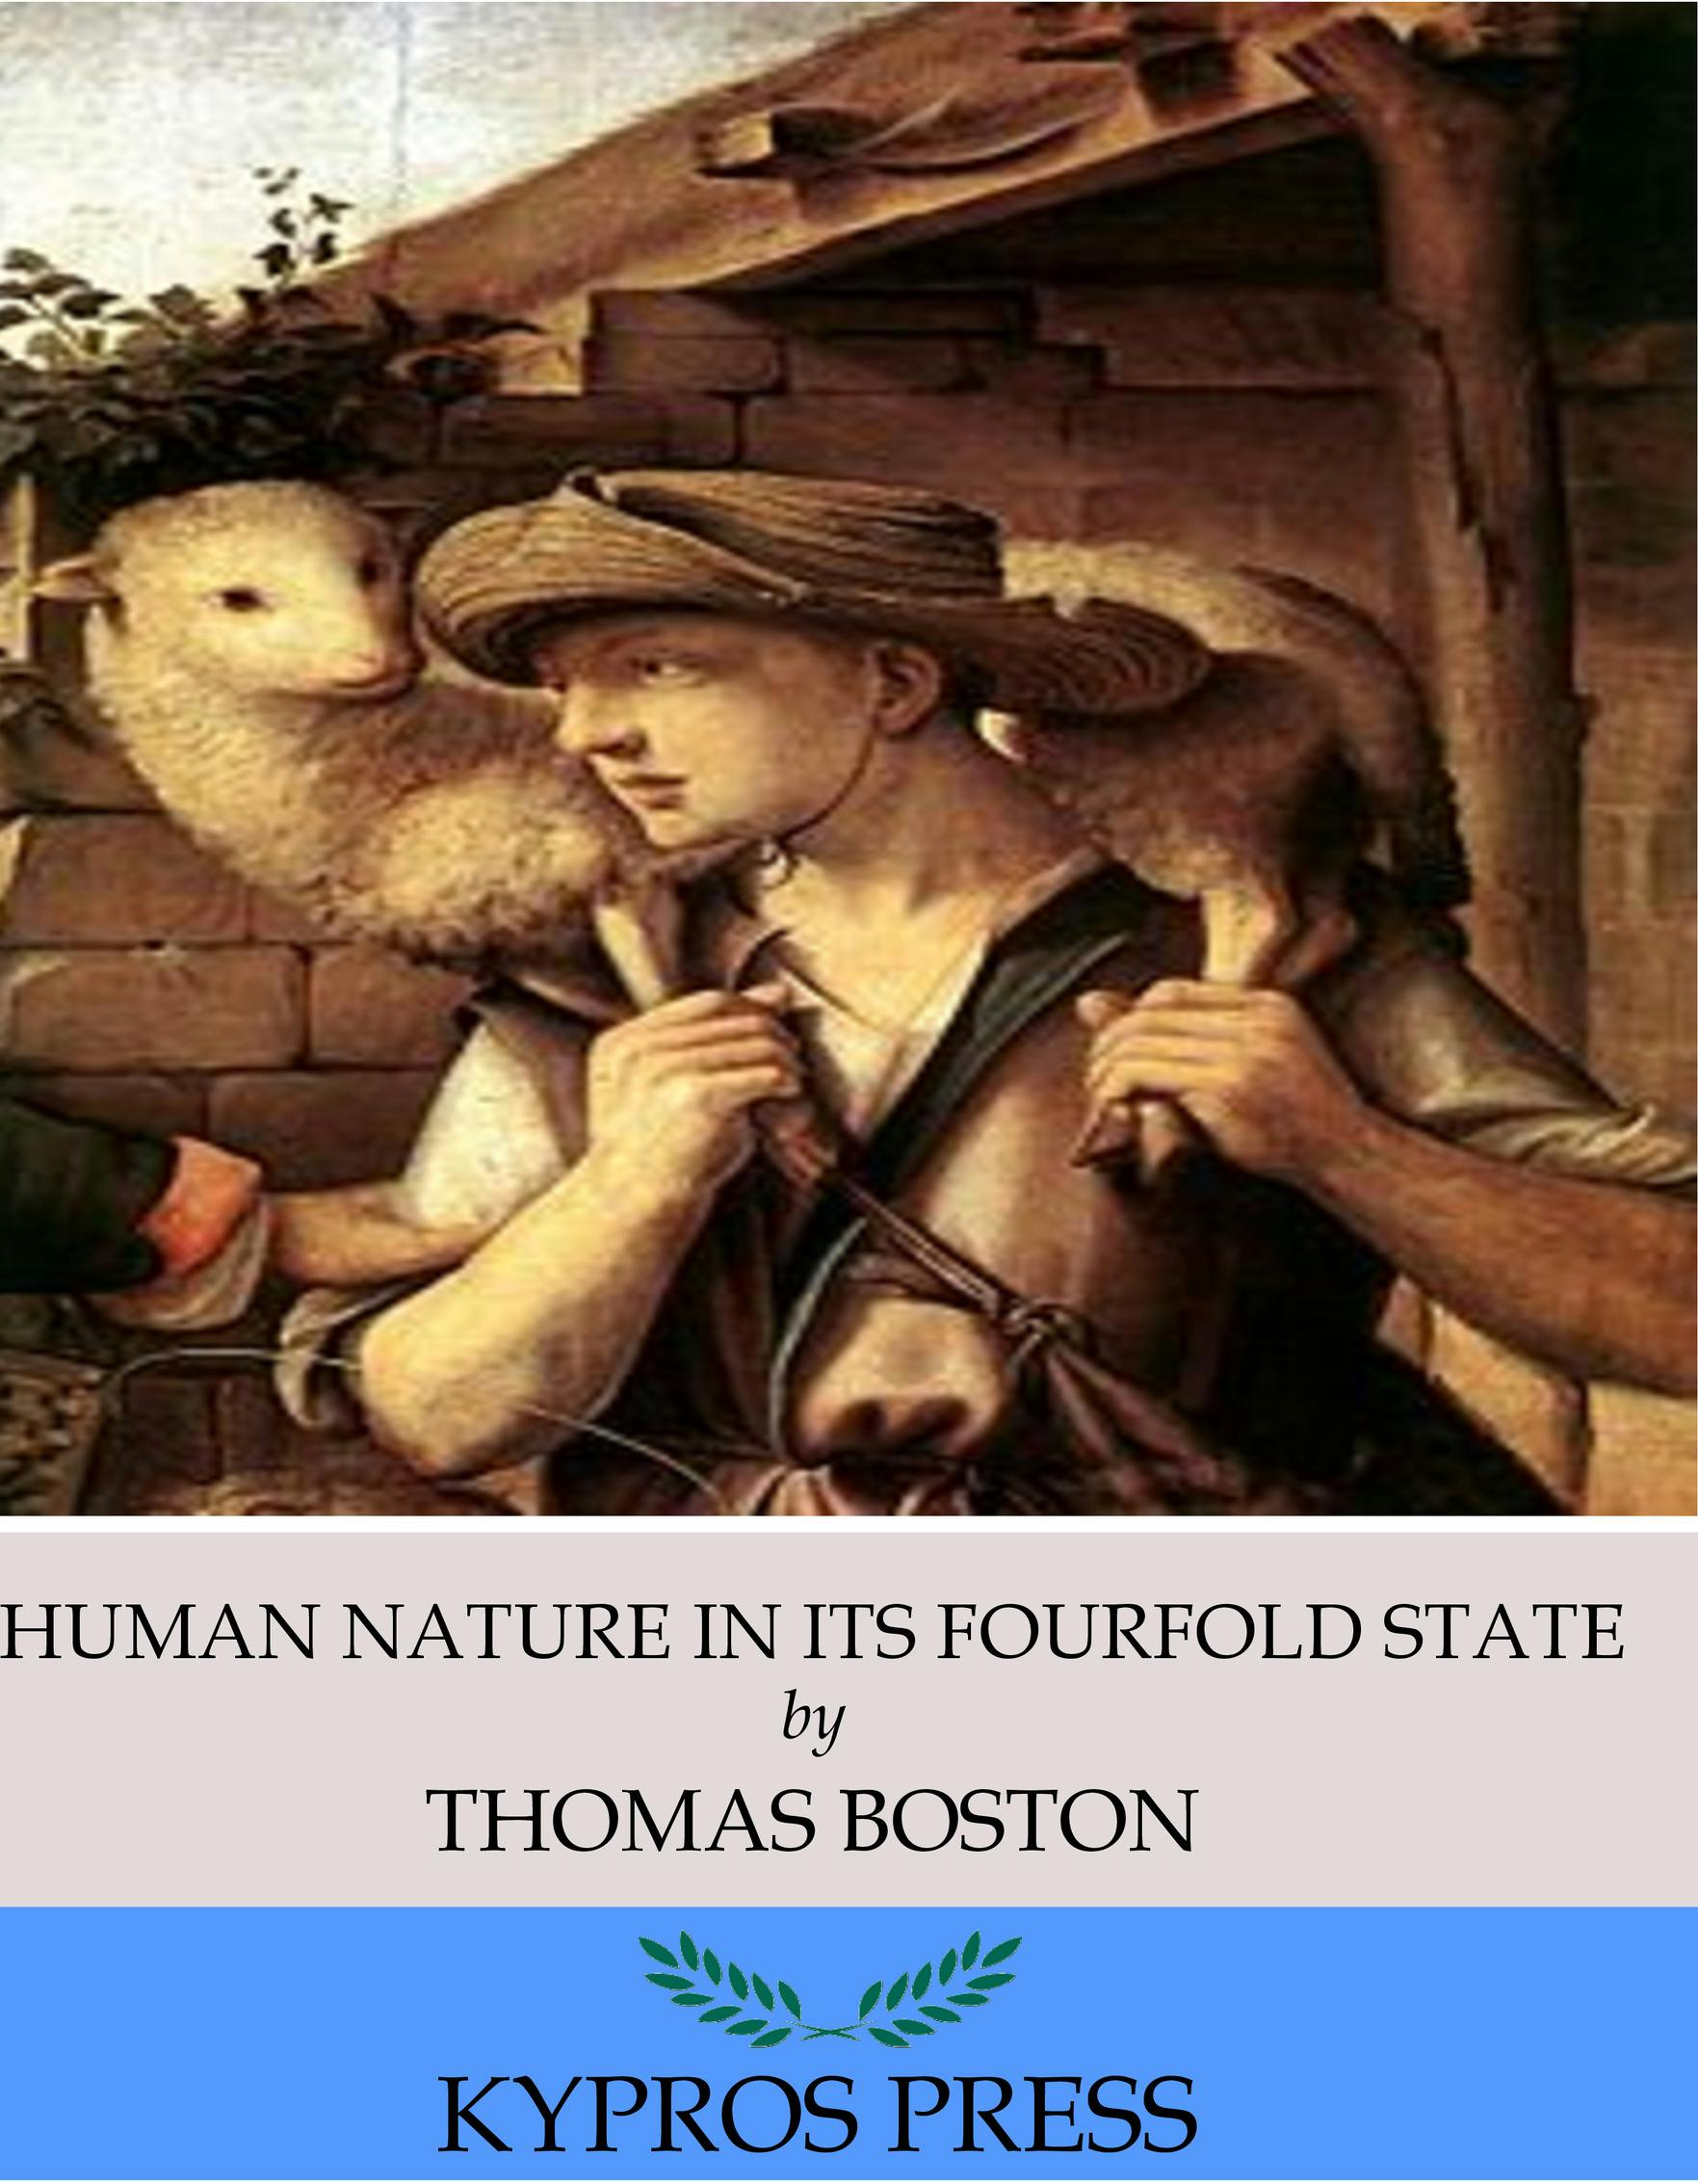 Human Nature in its Fourfold State - undefined